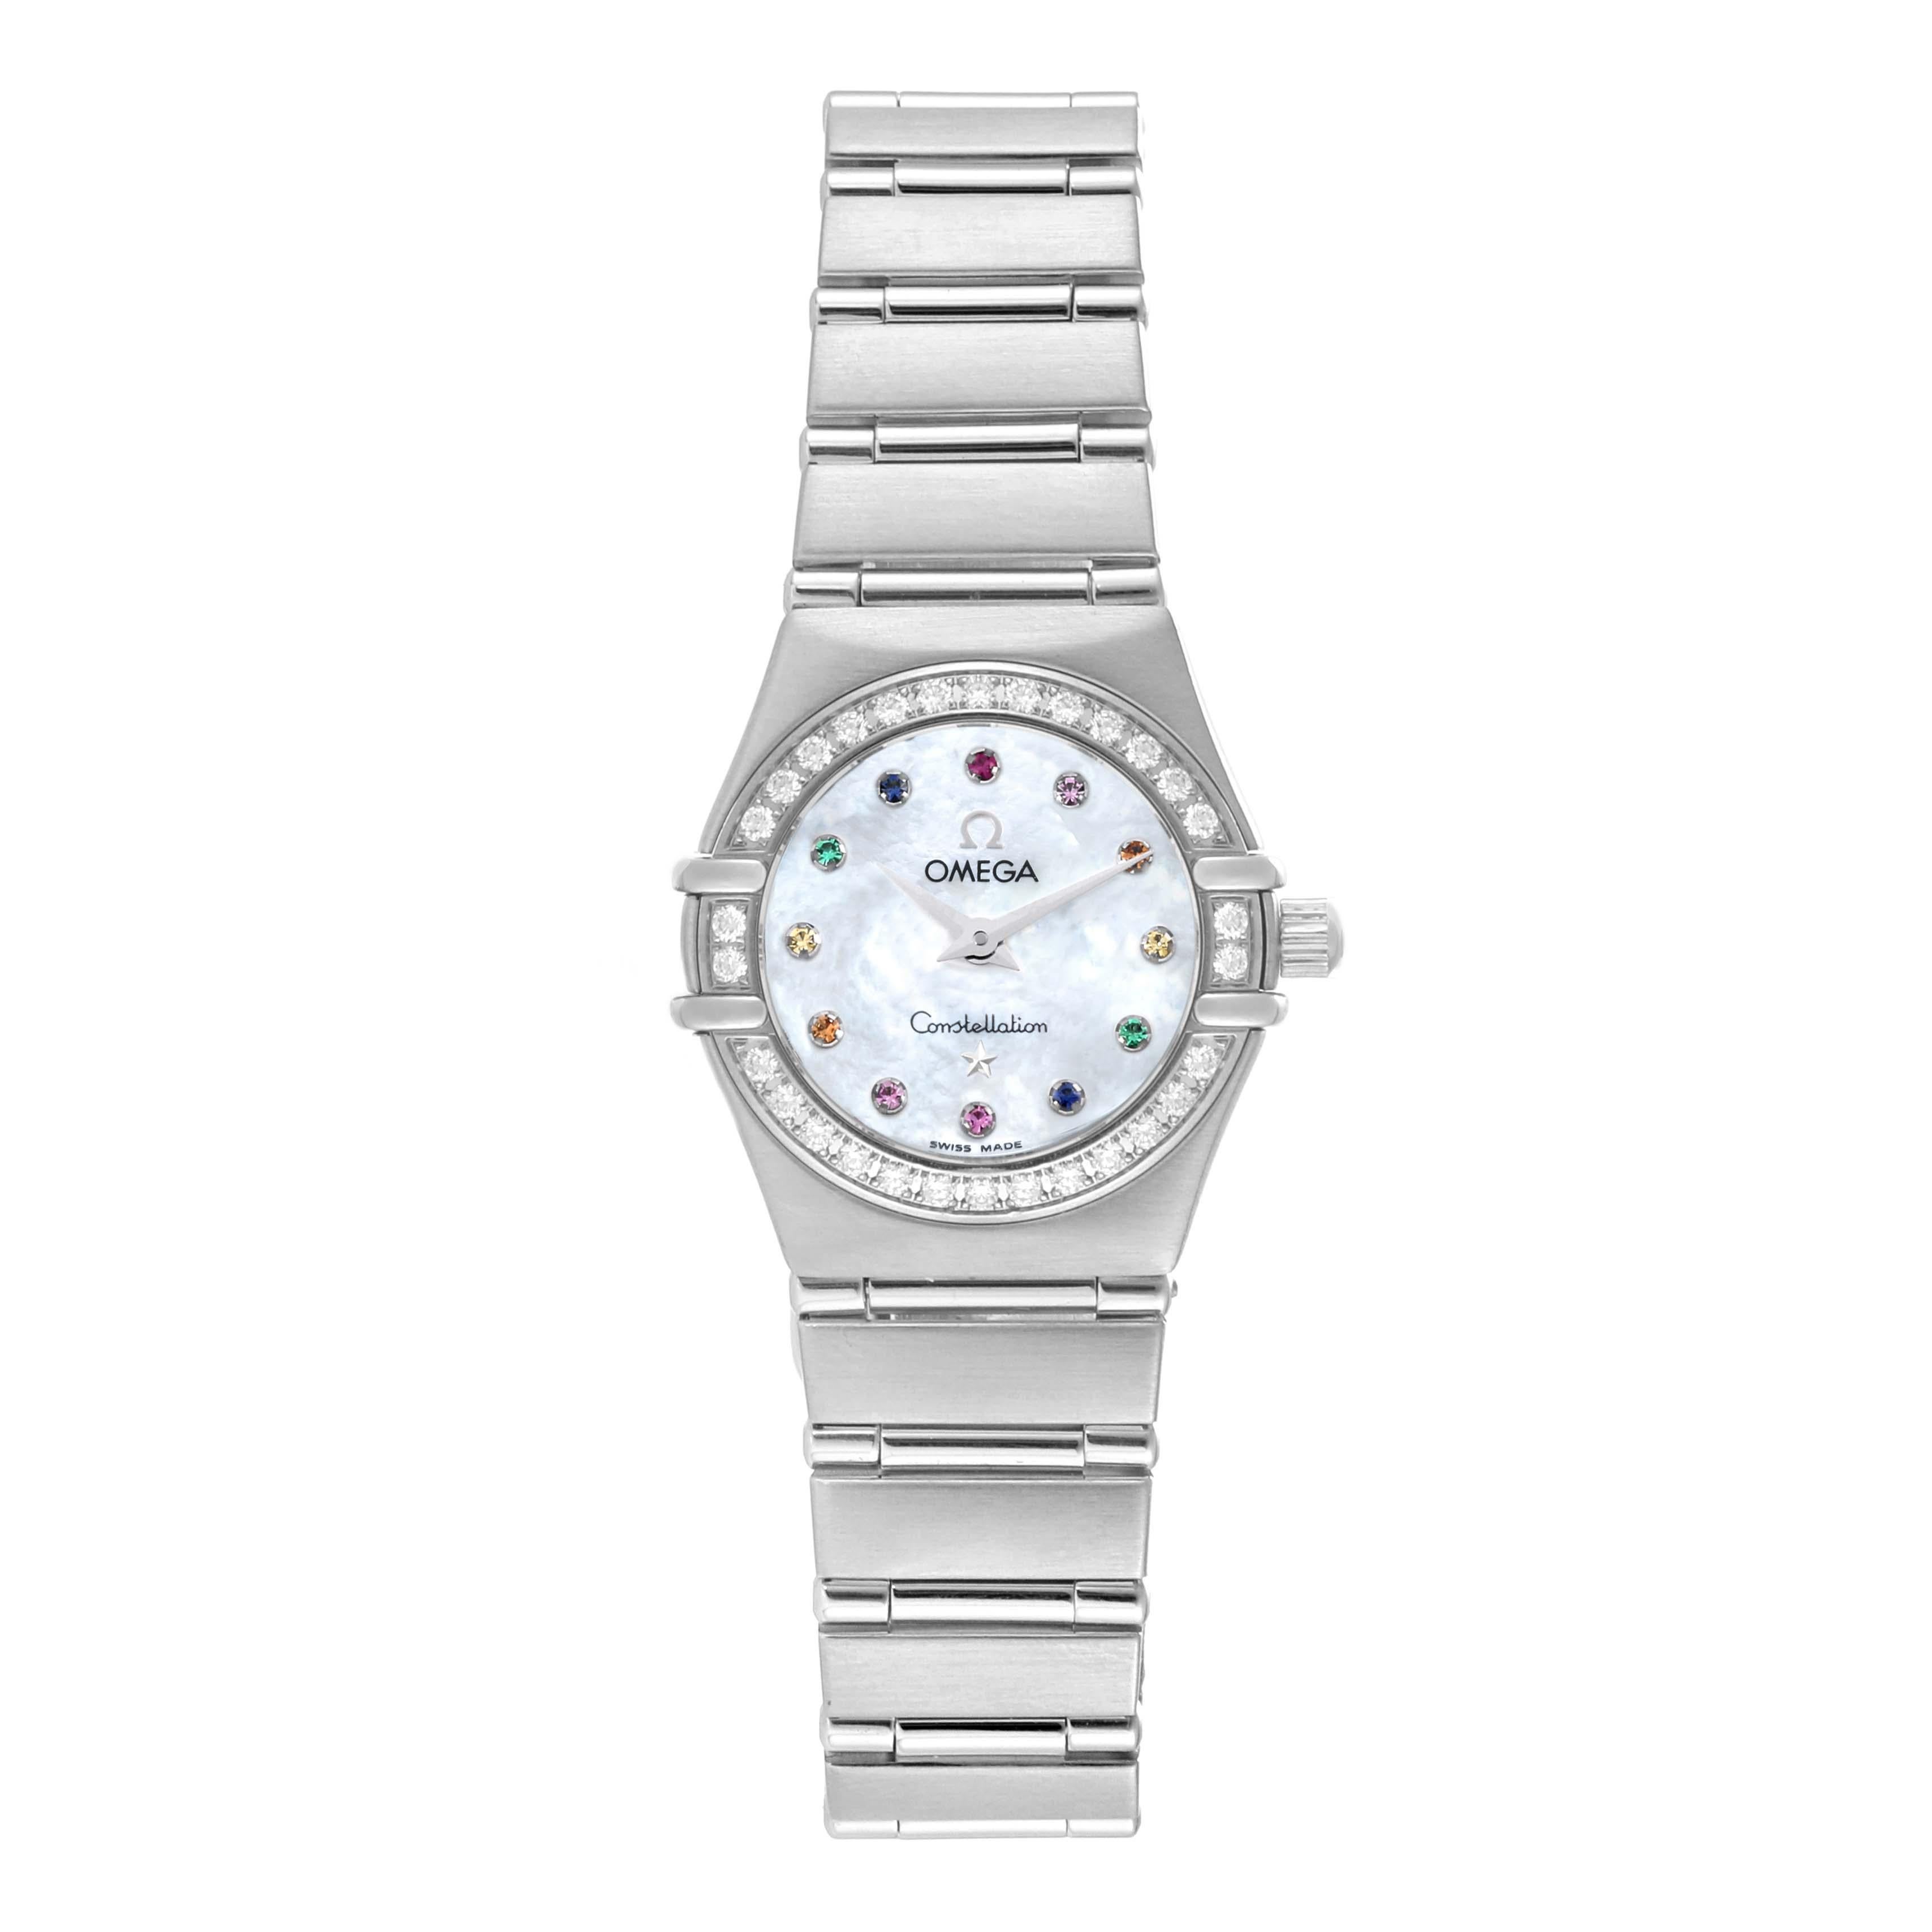 Omega Constellation Iris Mother of Pearl Diamond Steel Ladies Watch 1465.79.00. Quartz movement. Stainless steel round case 22.5 mm in diameter. Stainless steel bezel set with original Omega factory diamonds. Scratch resistant sapphire crystal.